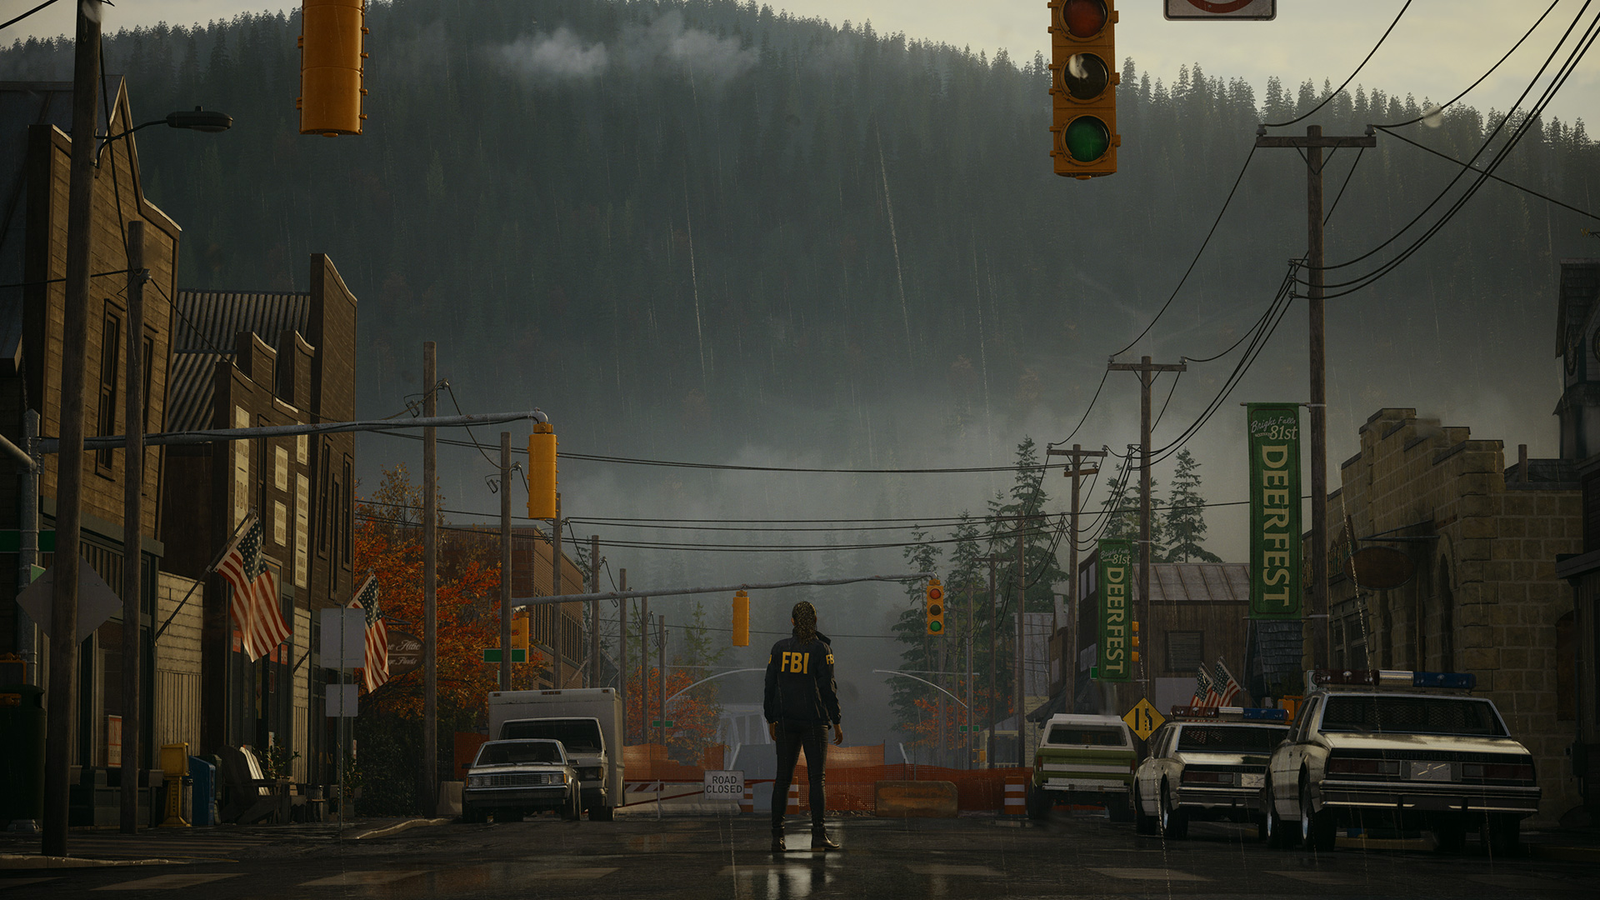 Alan Wake 2 is supposed to come out in October apparently